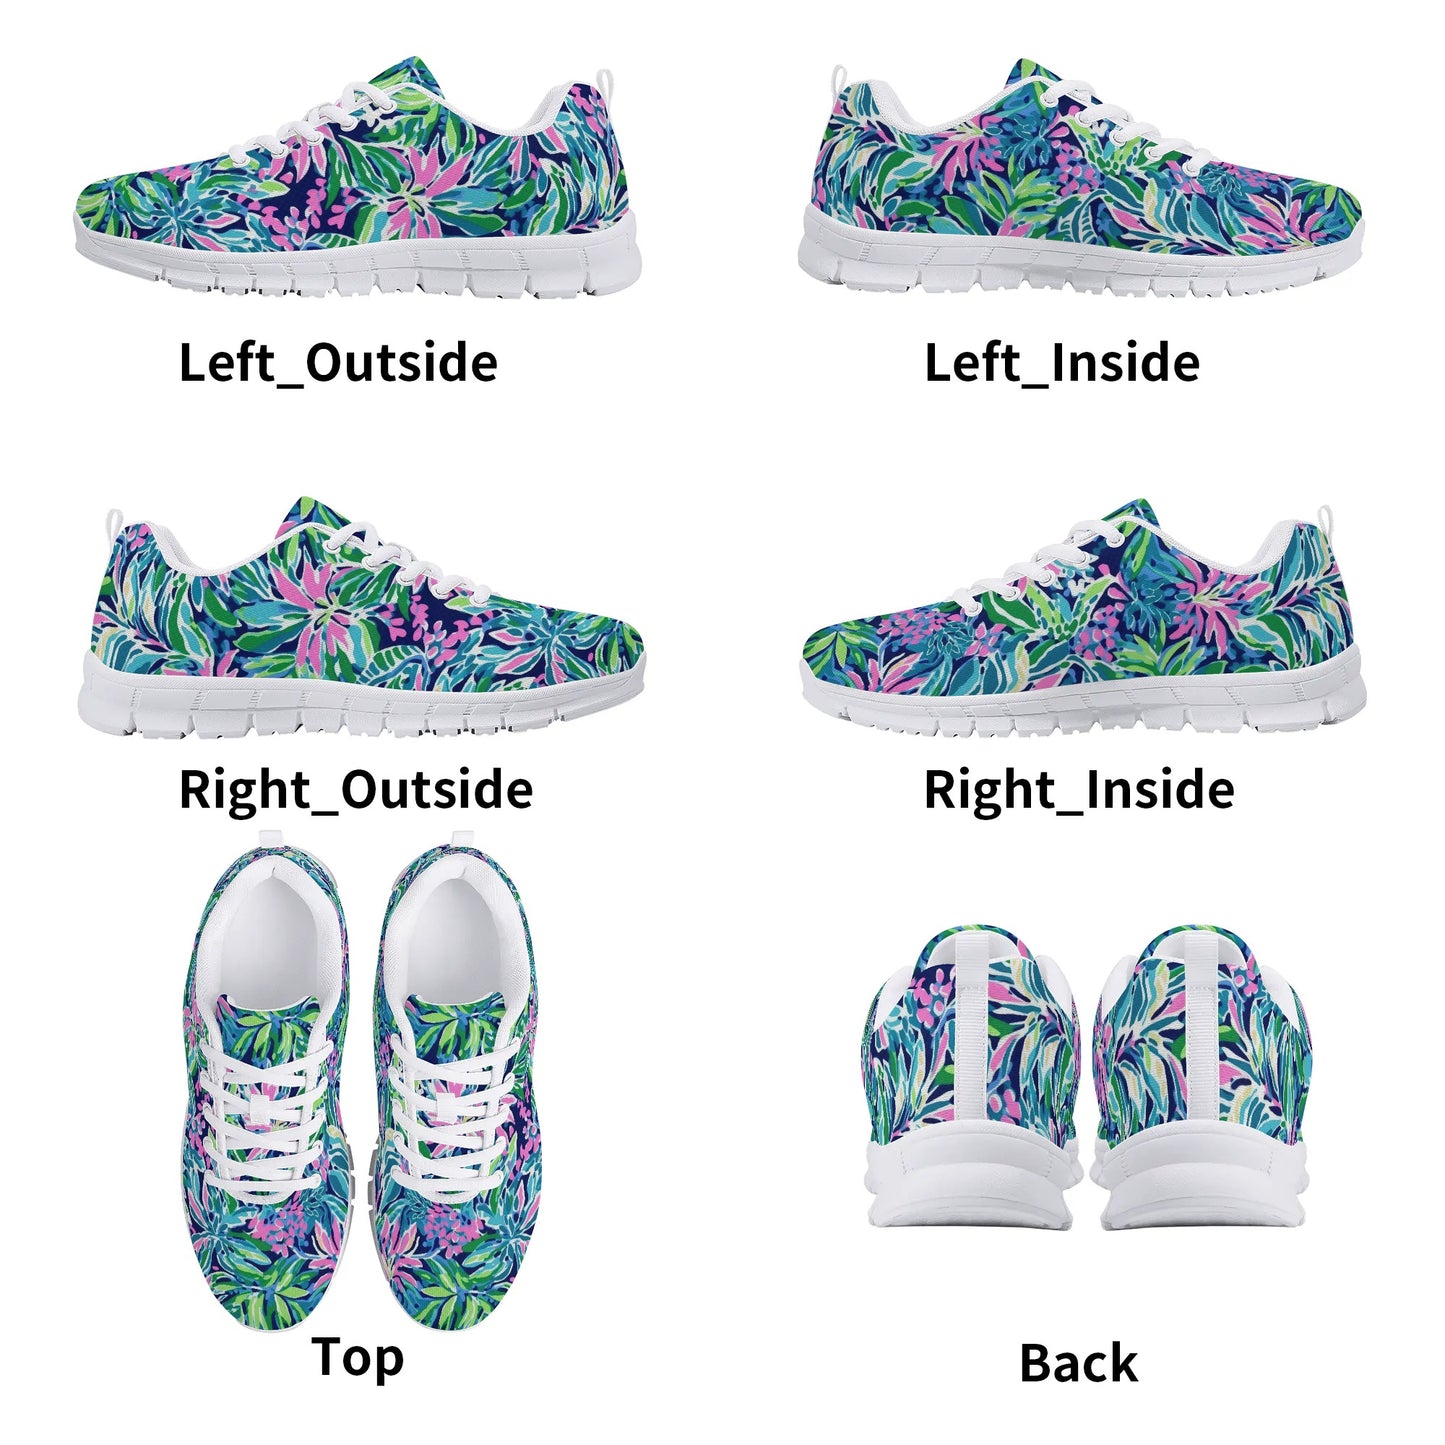 Seaside Blossoms: Coastal Spring Flowers in Pink, Green, and Navy Watercolors Womens EVA Mesh Running Shoes US5-US12